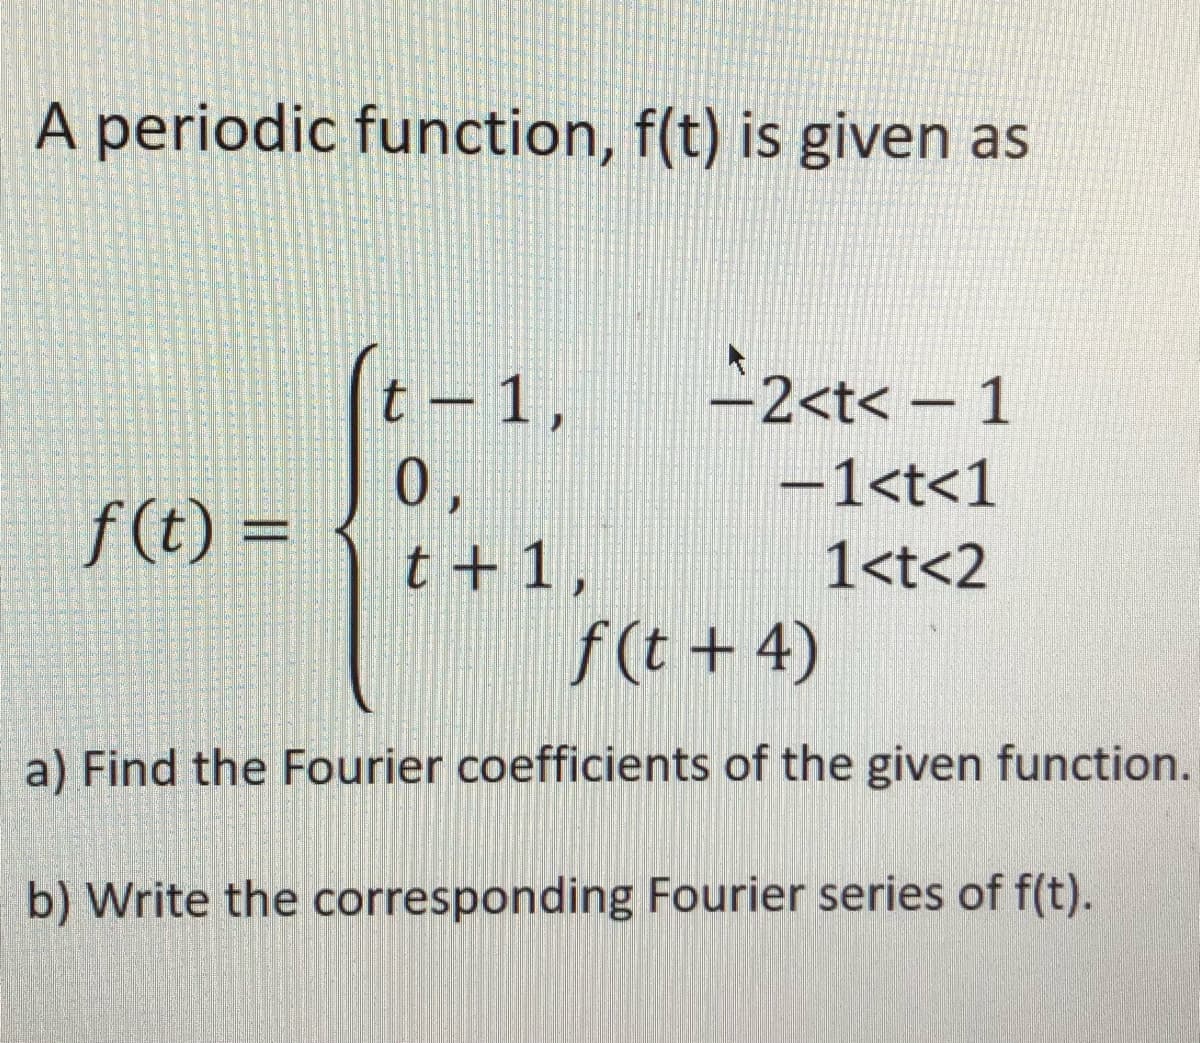 A periodic function, f(t) is given as
t – 1,
2<t< - 1
%3D
0,
-1<t<1
f (t) =
%3D
t + 1 ,
1<t<2
f(t + 4)
a) Find the Fourier coefficients of the given function.
b) Write the corresponding Fourier series of f(t).
